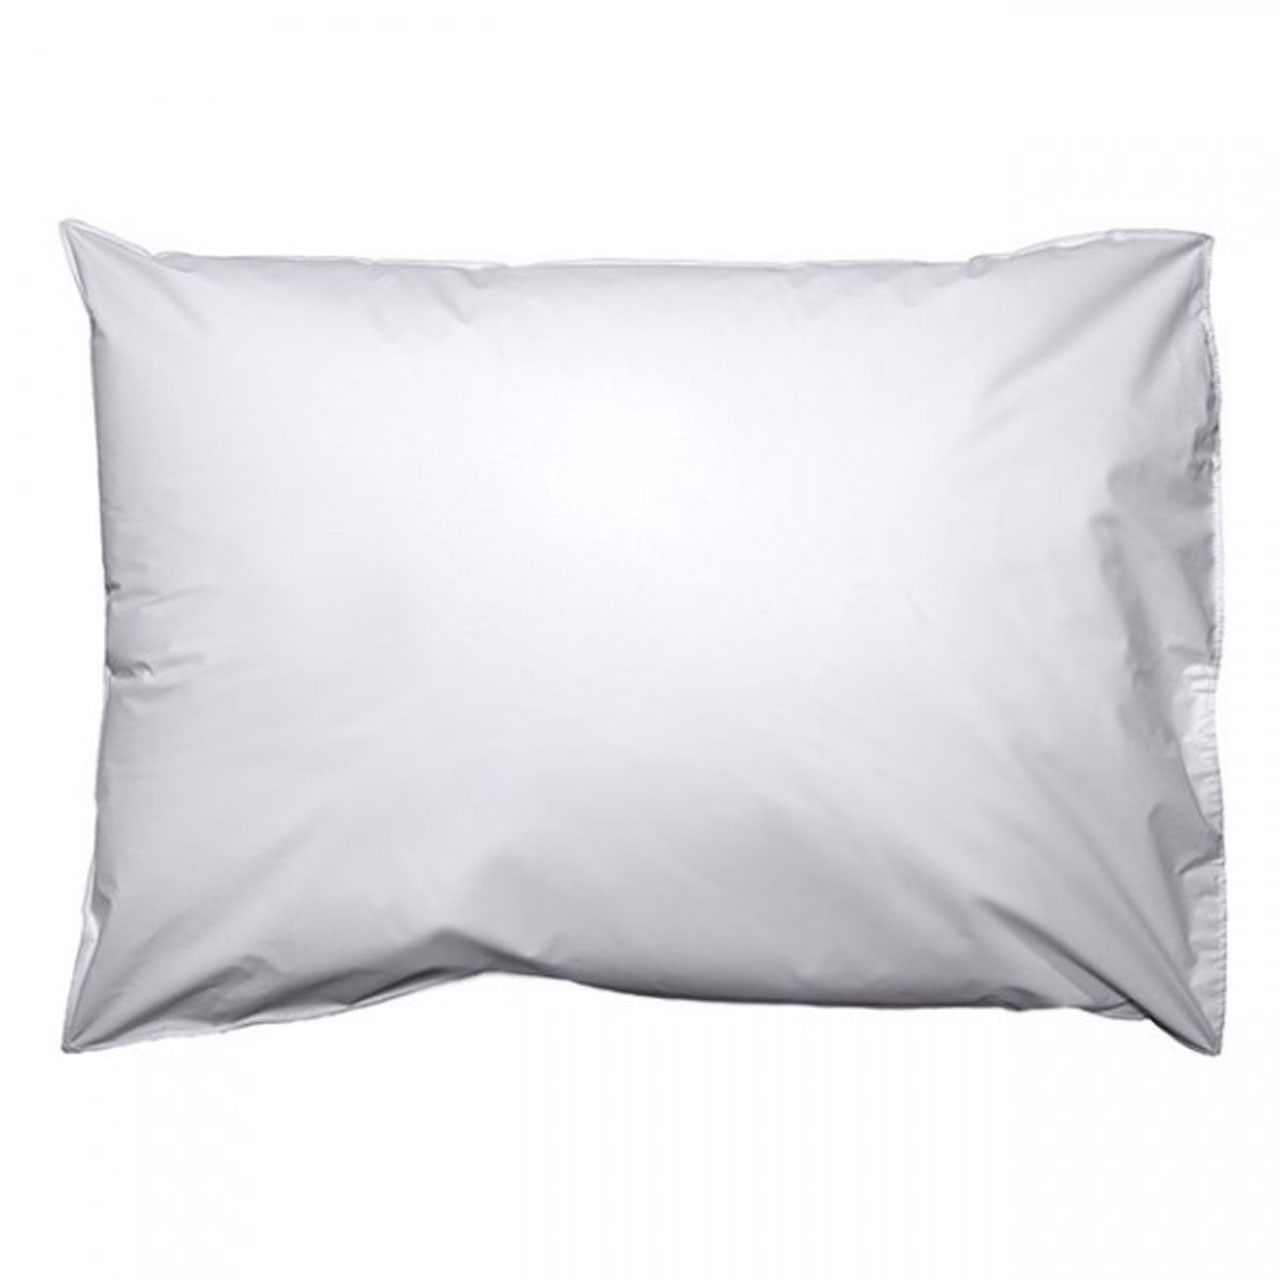 Does the hypoallergenic feature apply to the Standard Wipeable Pillows?